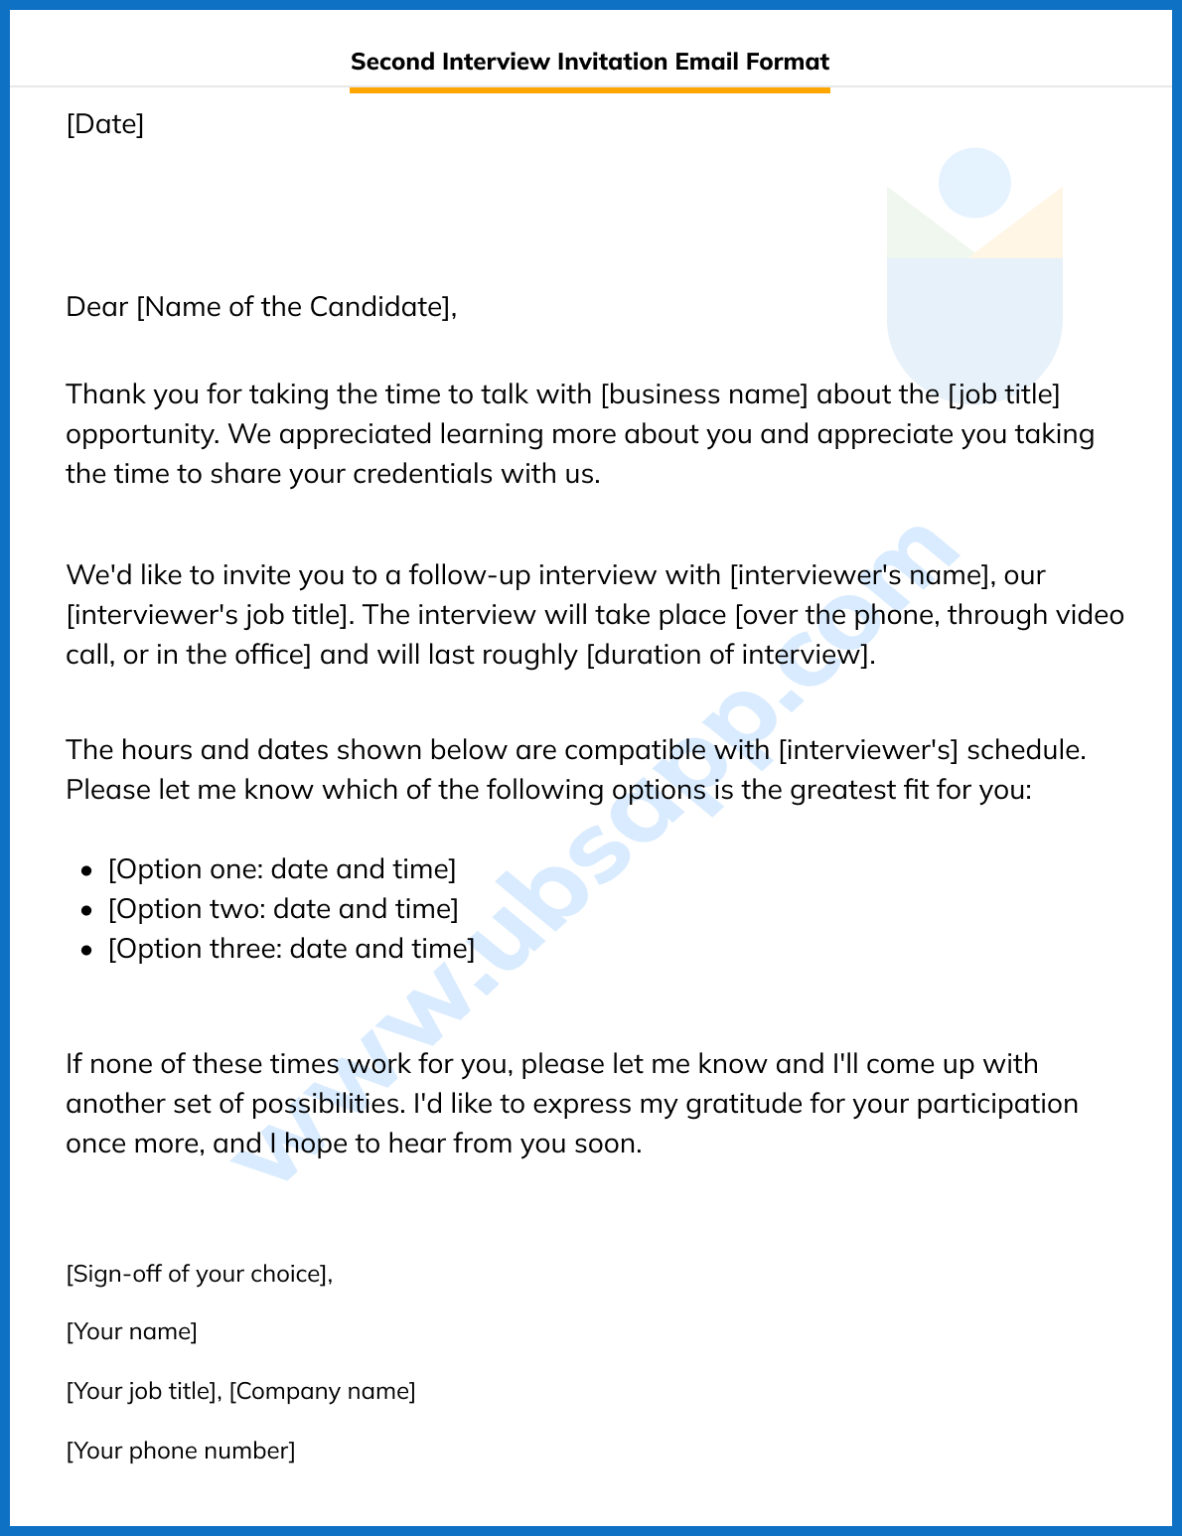 Second Interview Invitation Email - Format, Meaning, Template, Examples